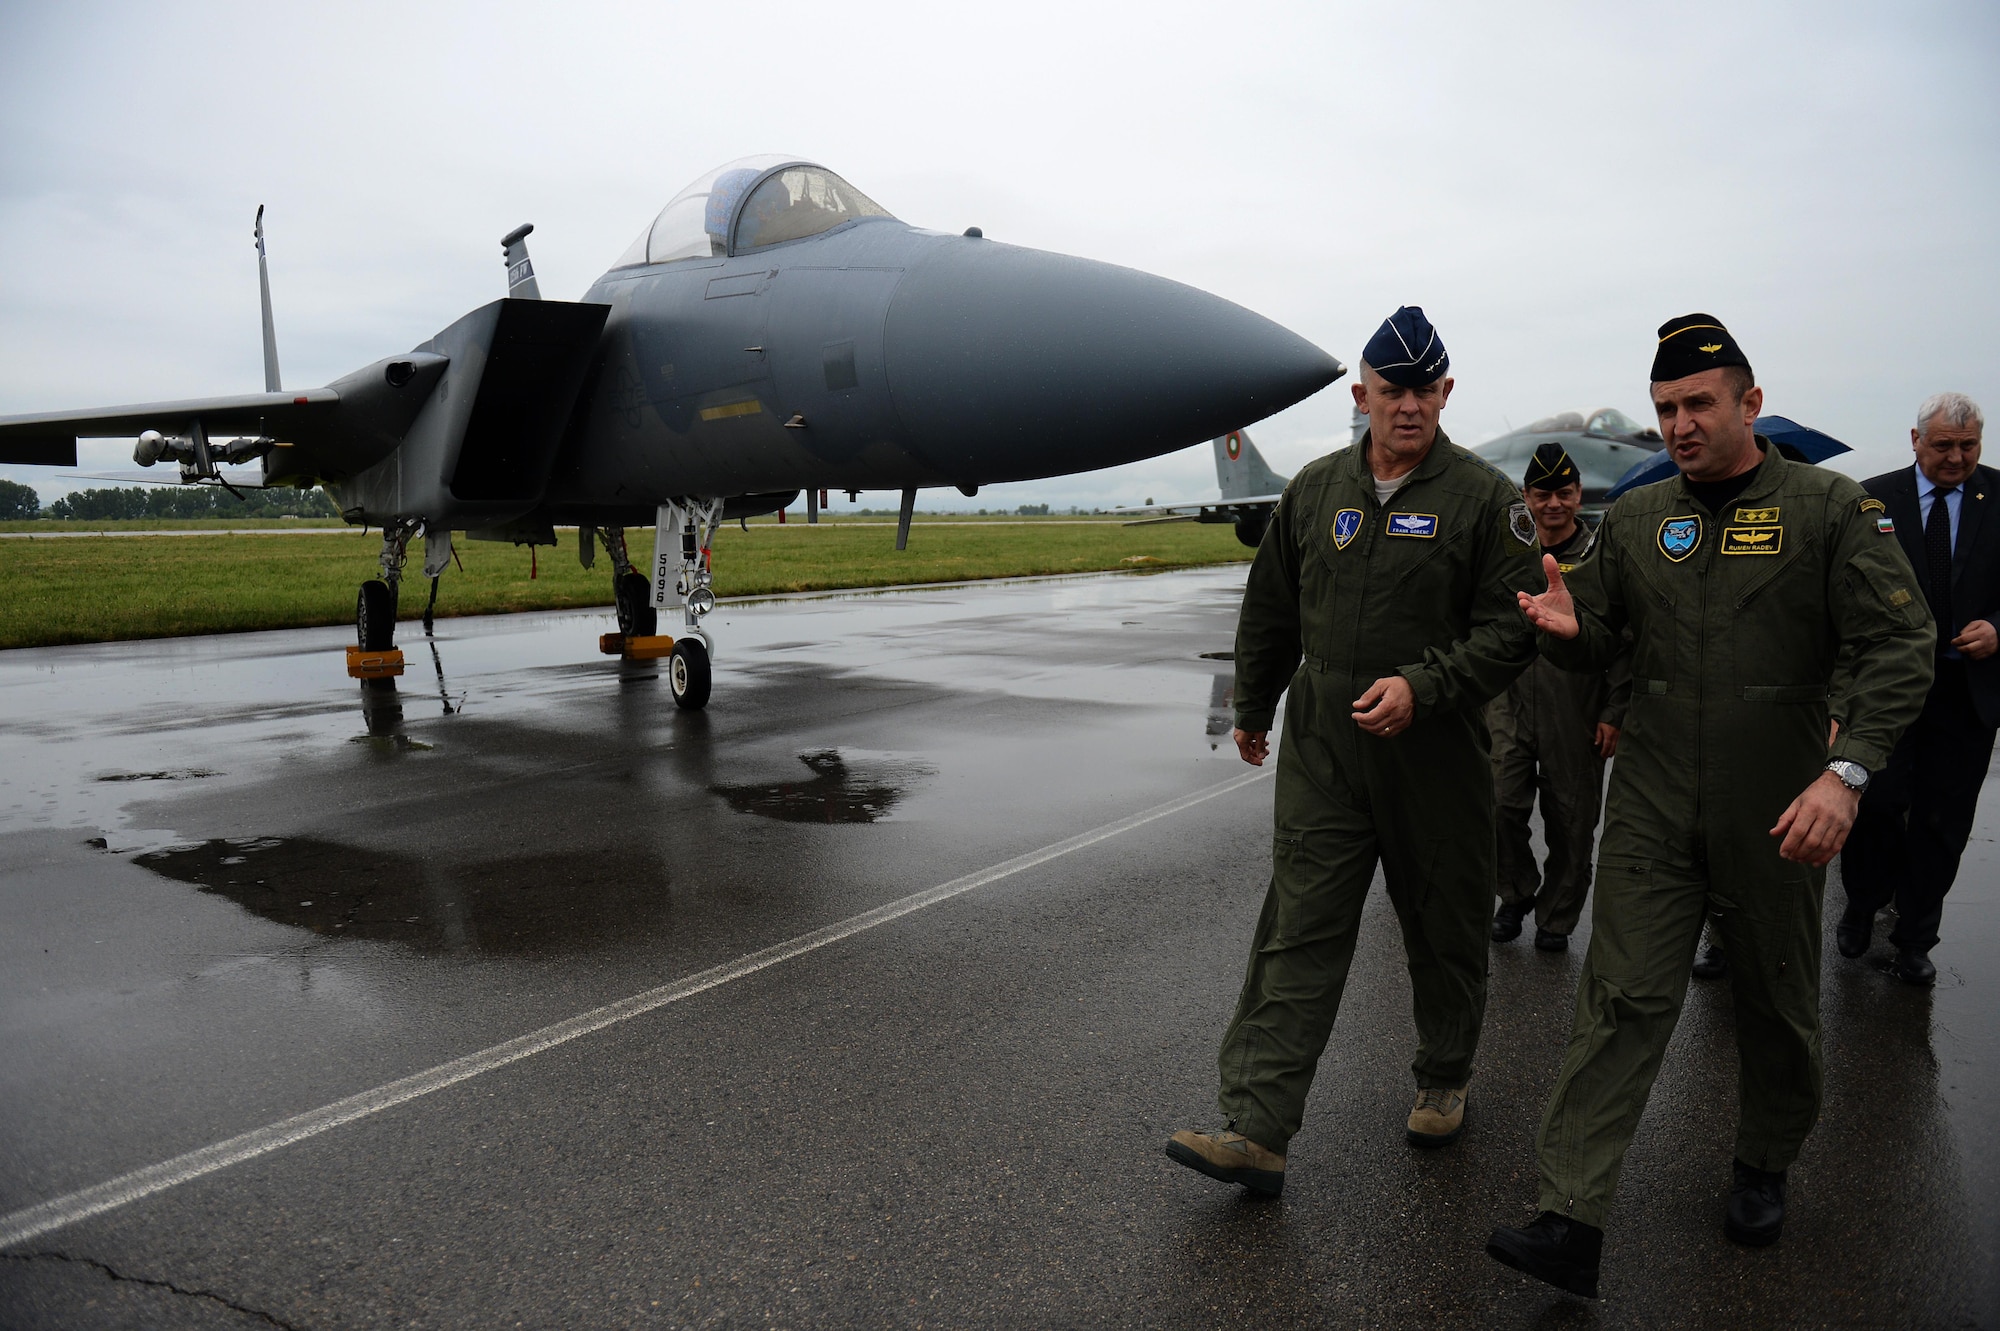 Gen. Frank Gorenc, the U.S. Air Forces in Europe and Air Forces Africa commander, walks with Maj. Gen. Rumen Radev, the Bulgarian Air Force commander, during a visit to Graf Ignatievo Air Base, Bulgaria, May 11, 2015. Airmen and F-15 Eagles from the 159th Expeditionary Fighter Squadron are part of Europe's first-ever theater security package deployment. The European TSP provides the opportunity for U.S. forces to train with NATO allies and is enabled by the strategic access provided by the infrastructure, support and host-nation relationships at U.S. and host-nation installations. (U.S. Air Force photo/Senior Airman Gustavo Castillo)